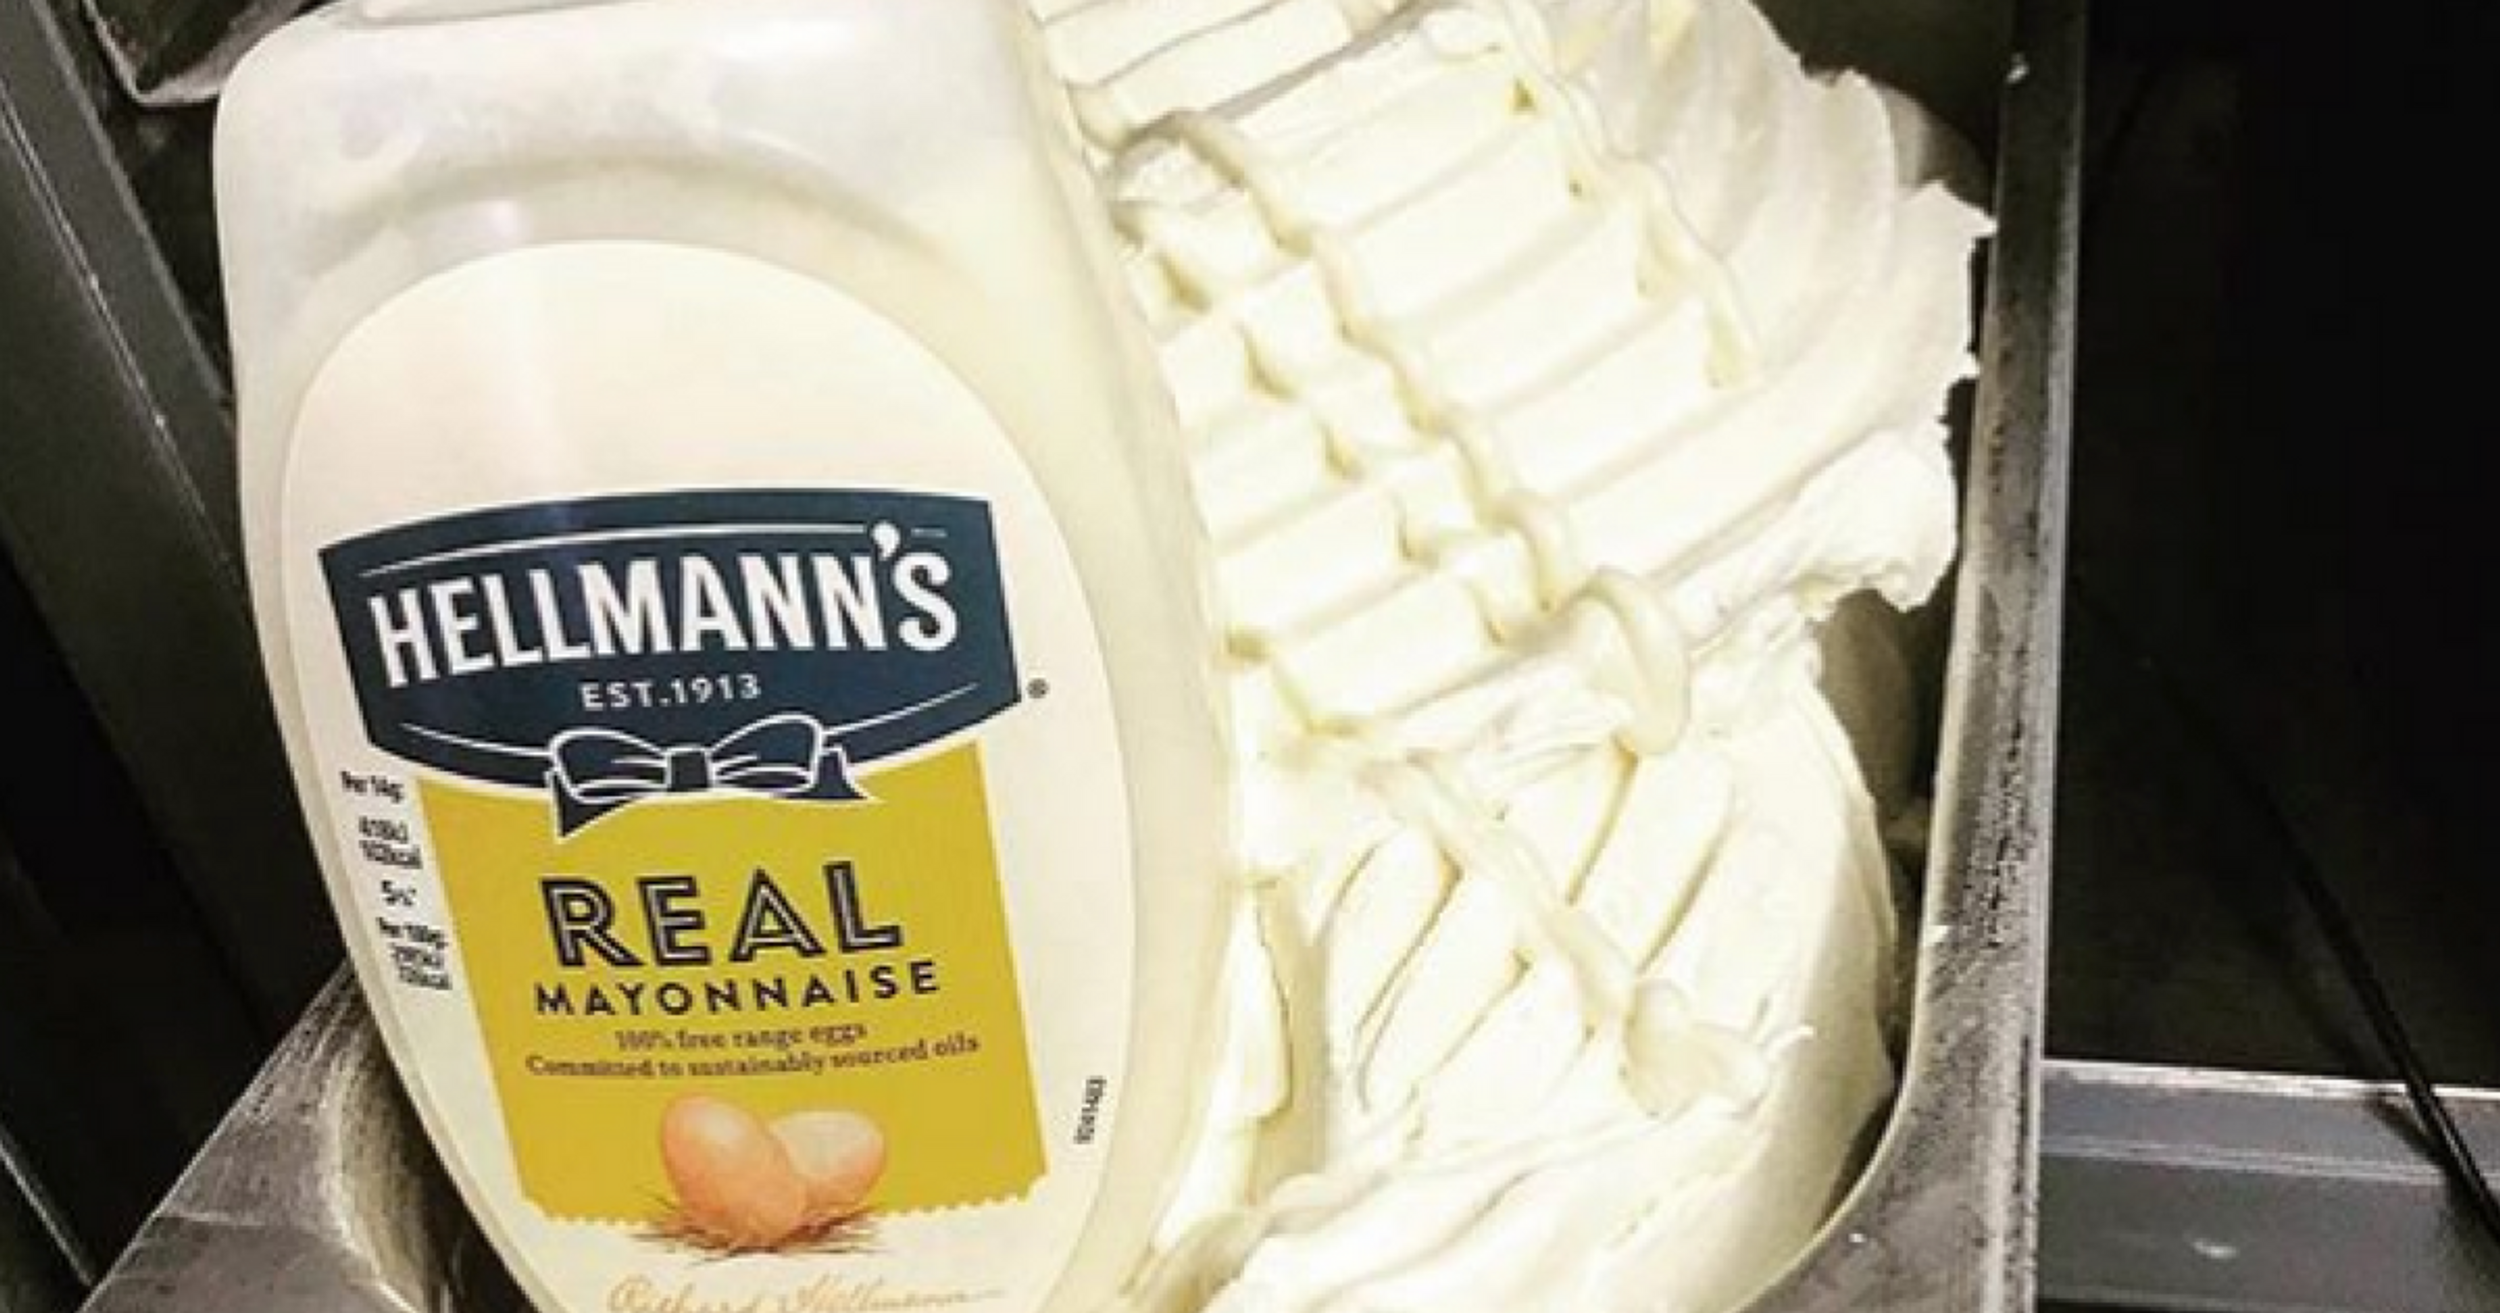 Mayonnaise Flavored Ice Cream Is Now A Thing--And People Don't Know What To Think About It